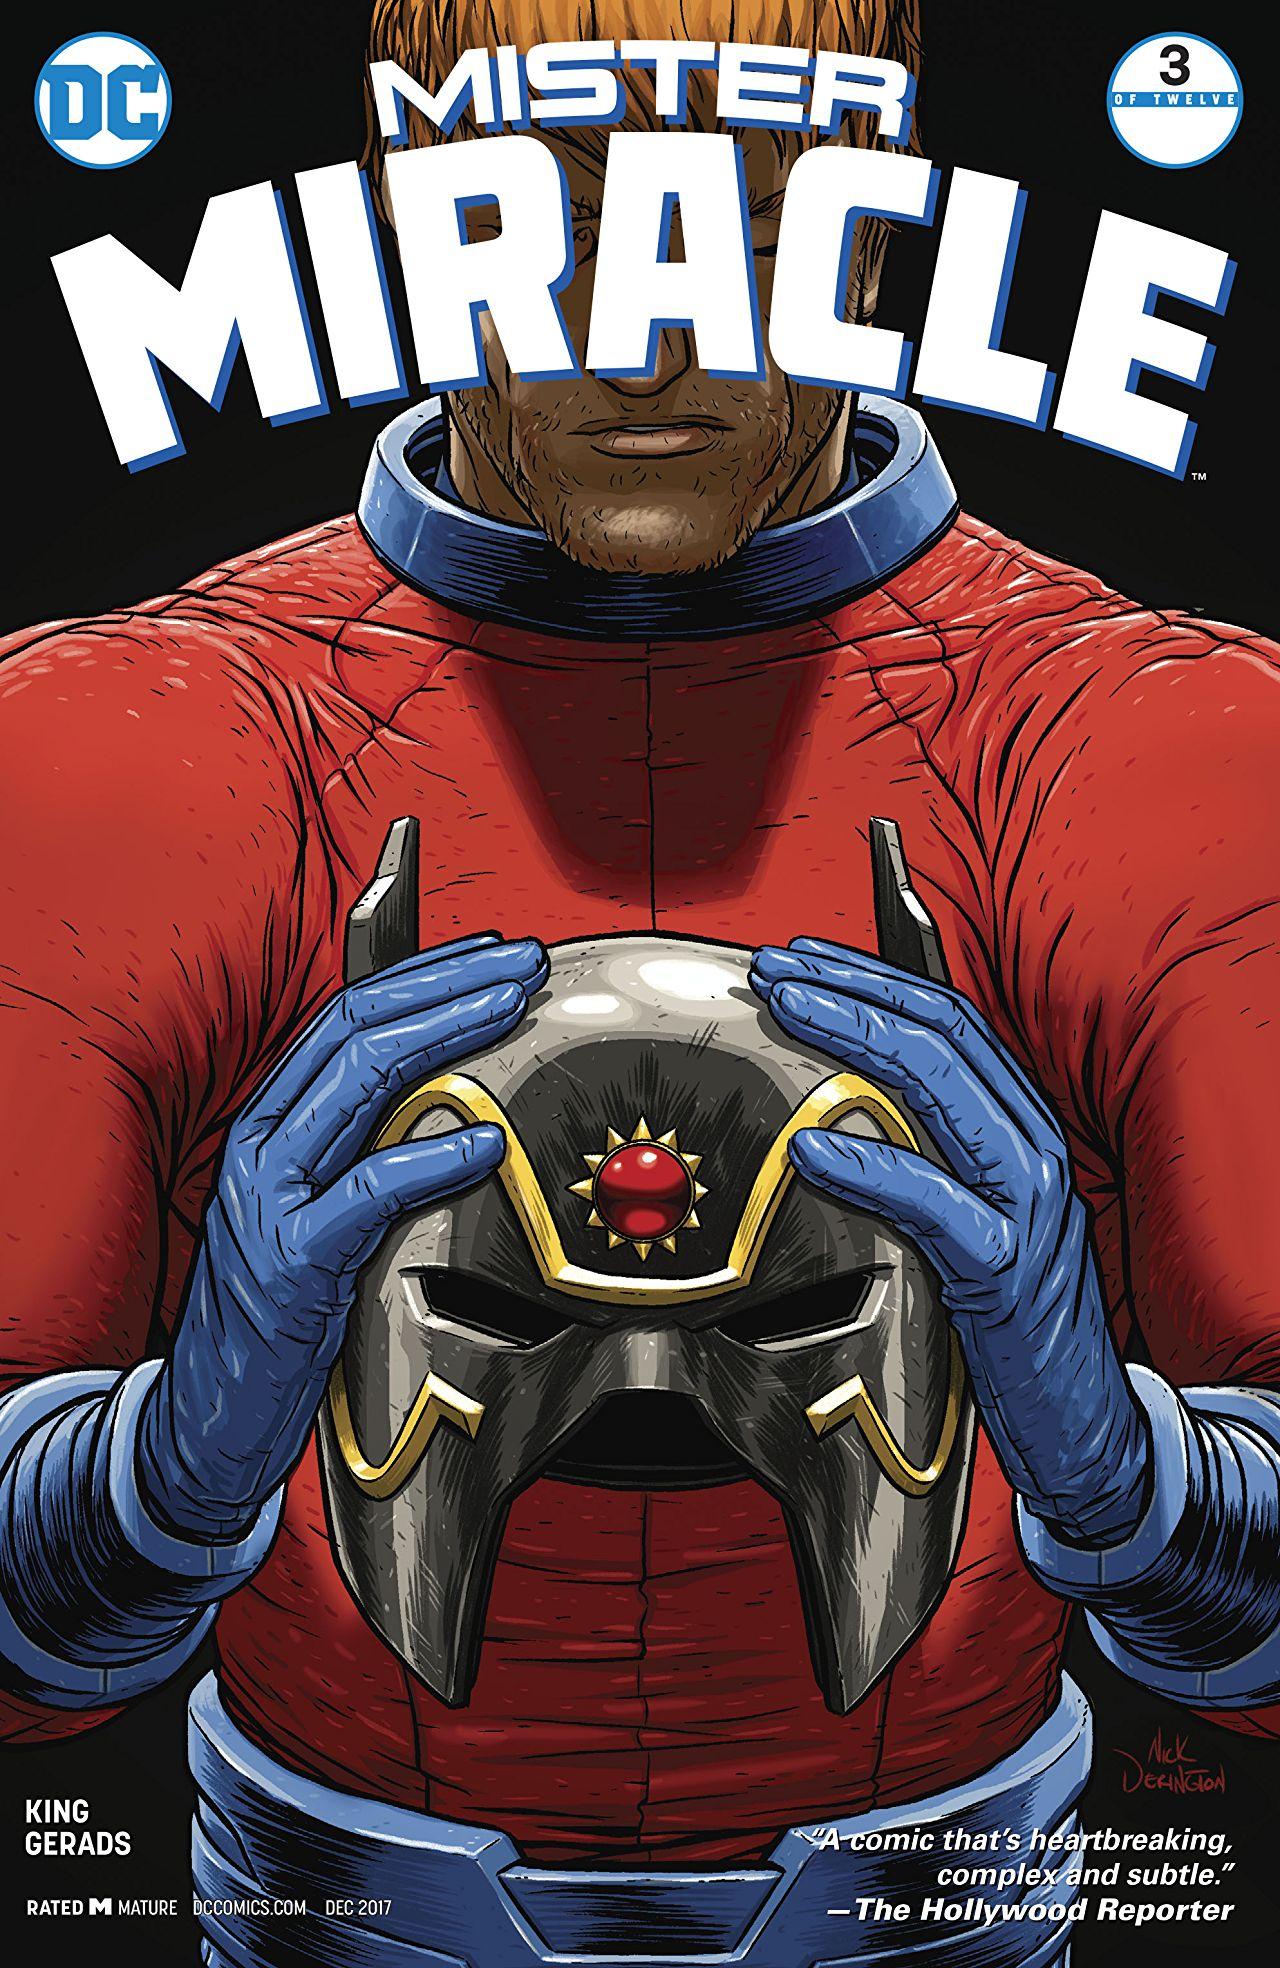 Mister Miracle Vol. 4 #3